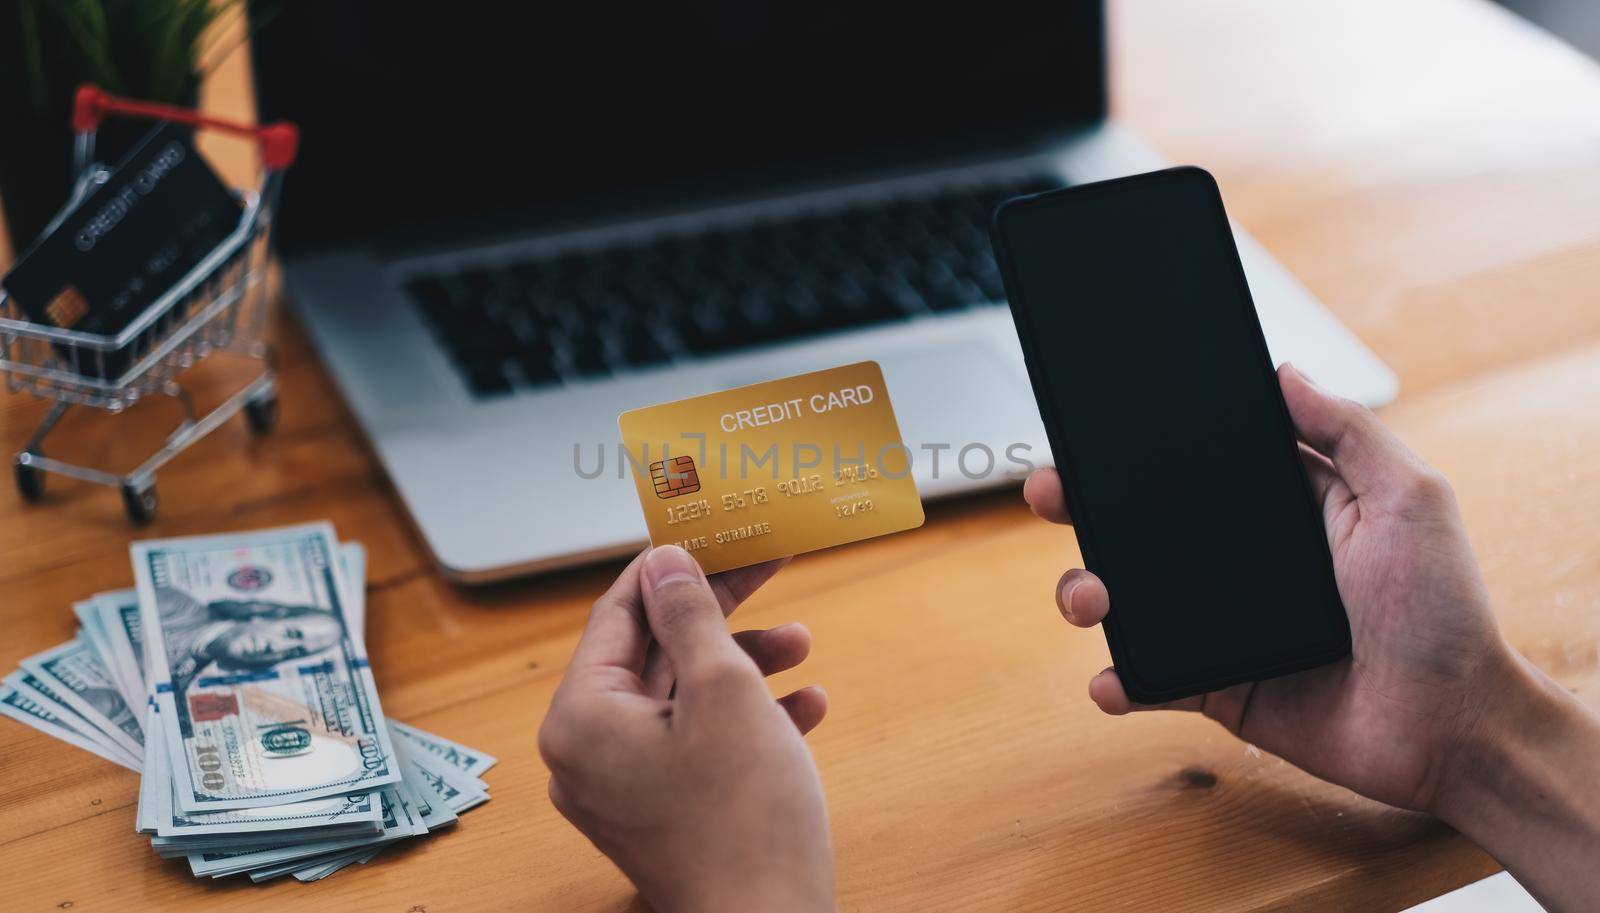 shopping online with credit card using smart phone at home. online purchase concept.